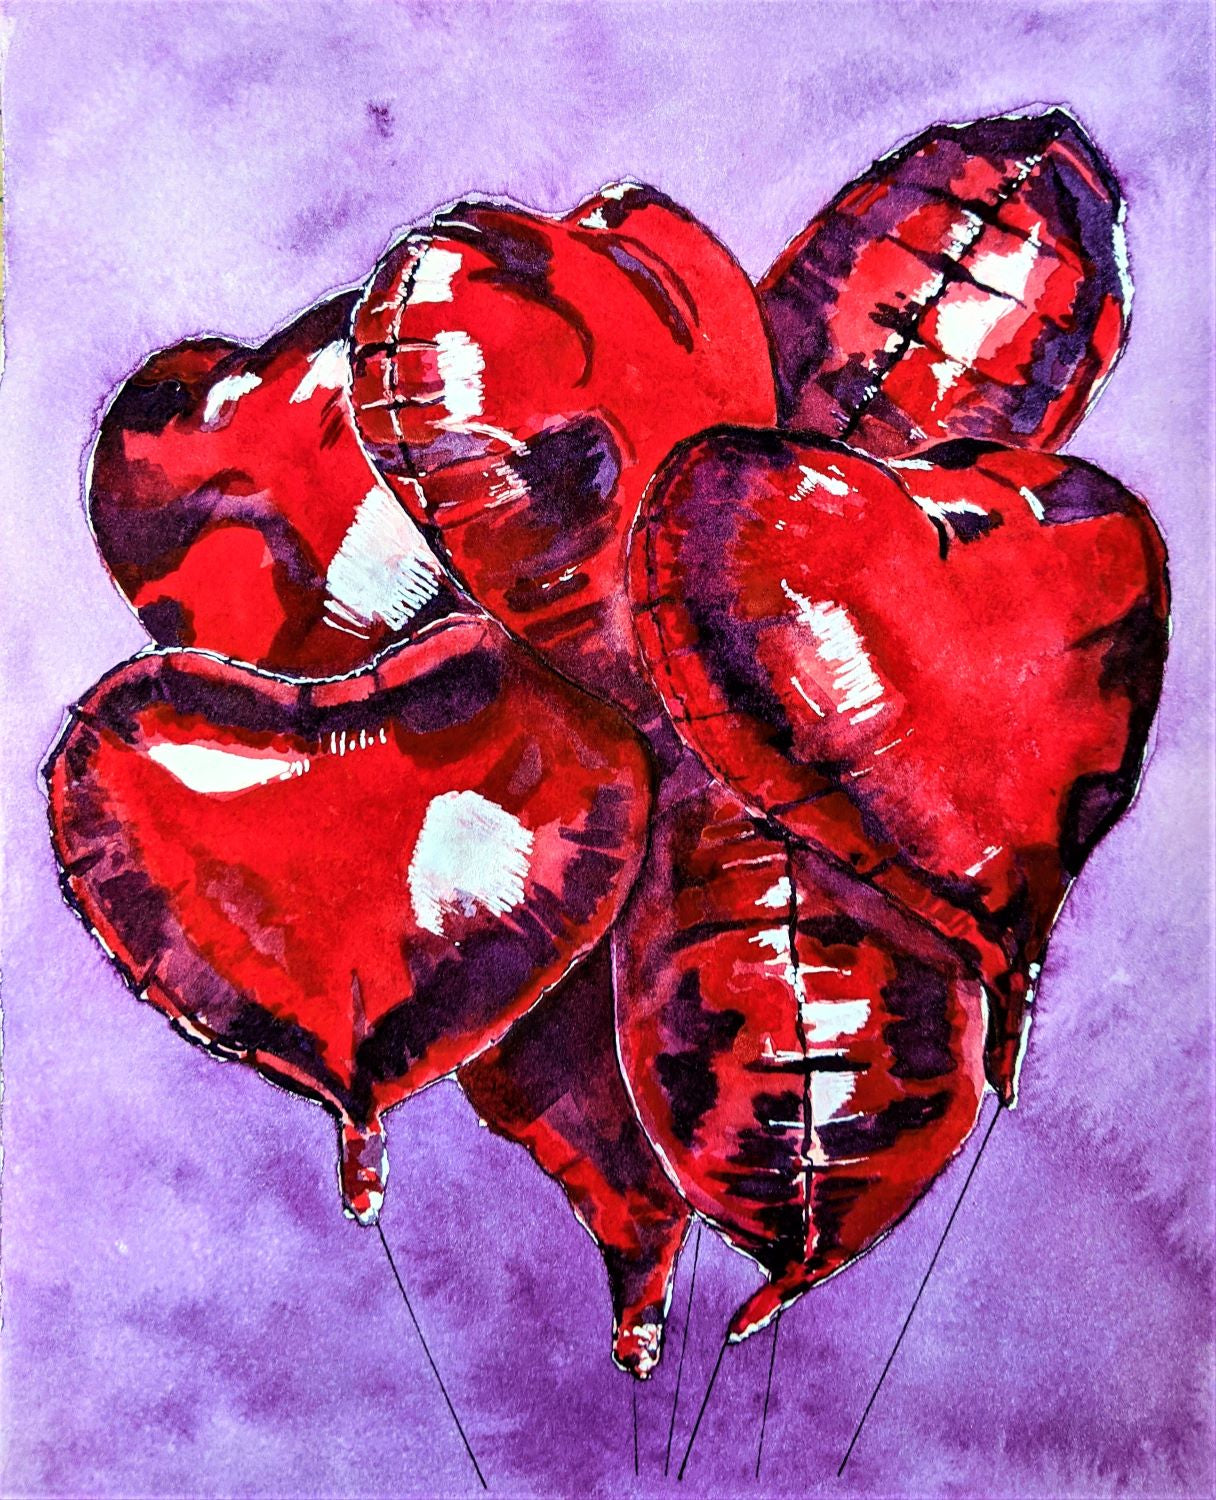 Balloon Bouquet watercolor painting on paper